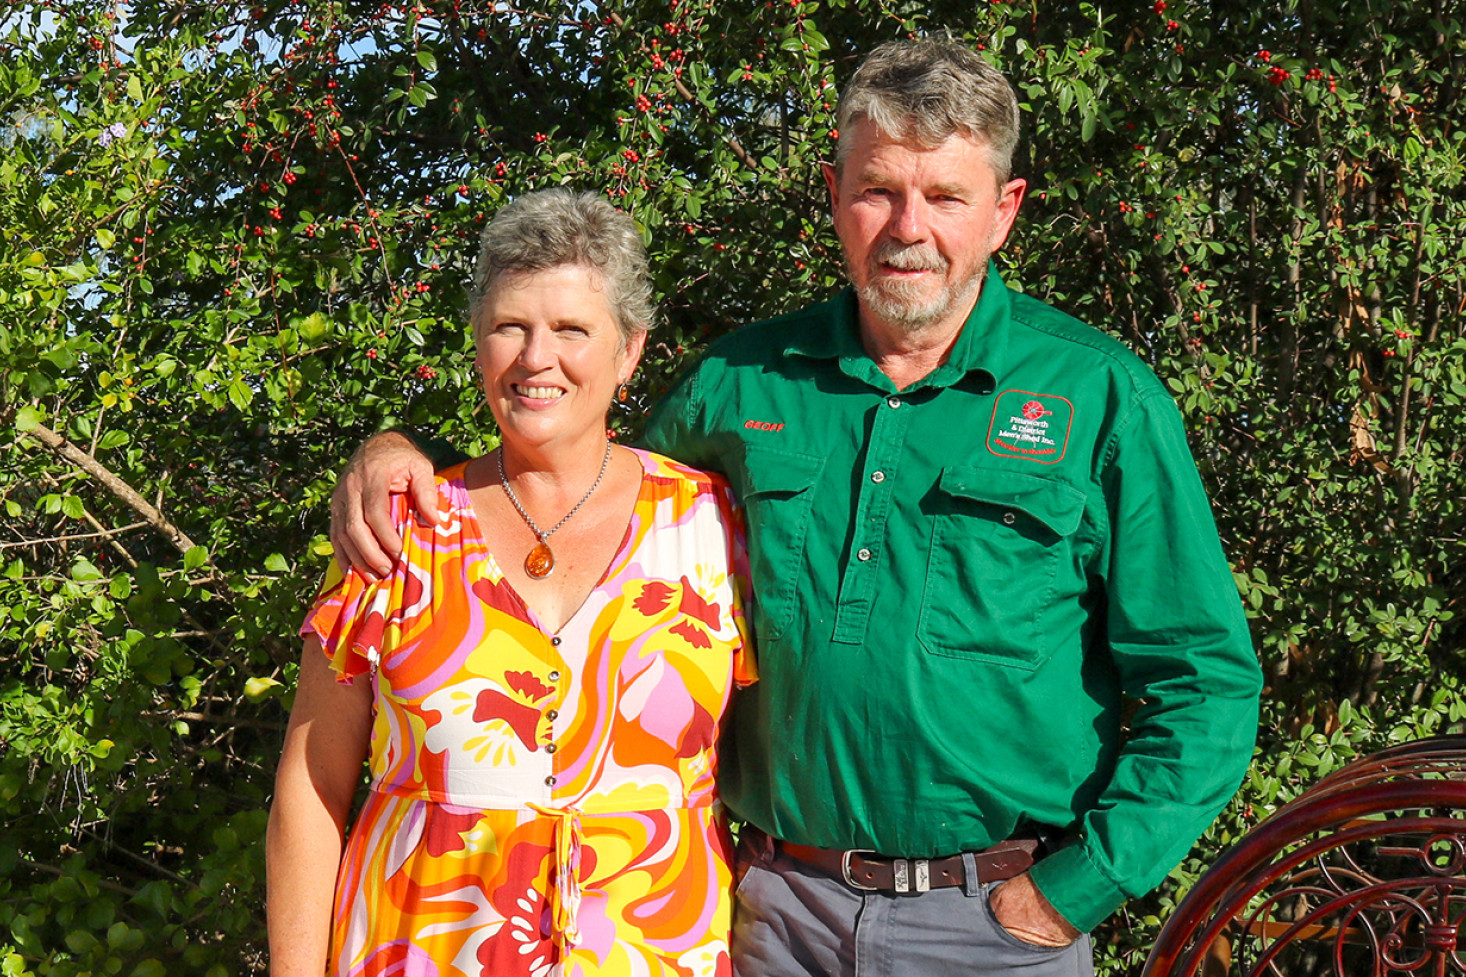 Linda and Geoff Birch are among 130 Australians travelling to Cambodia, to build houses for families in the Every Piece Matters (EPM) Village outside of Phnom Penh.